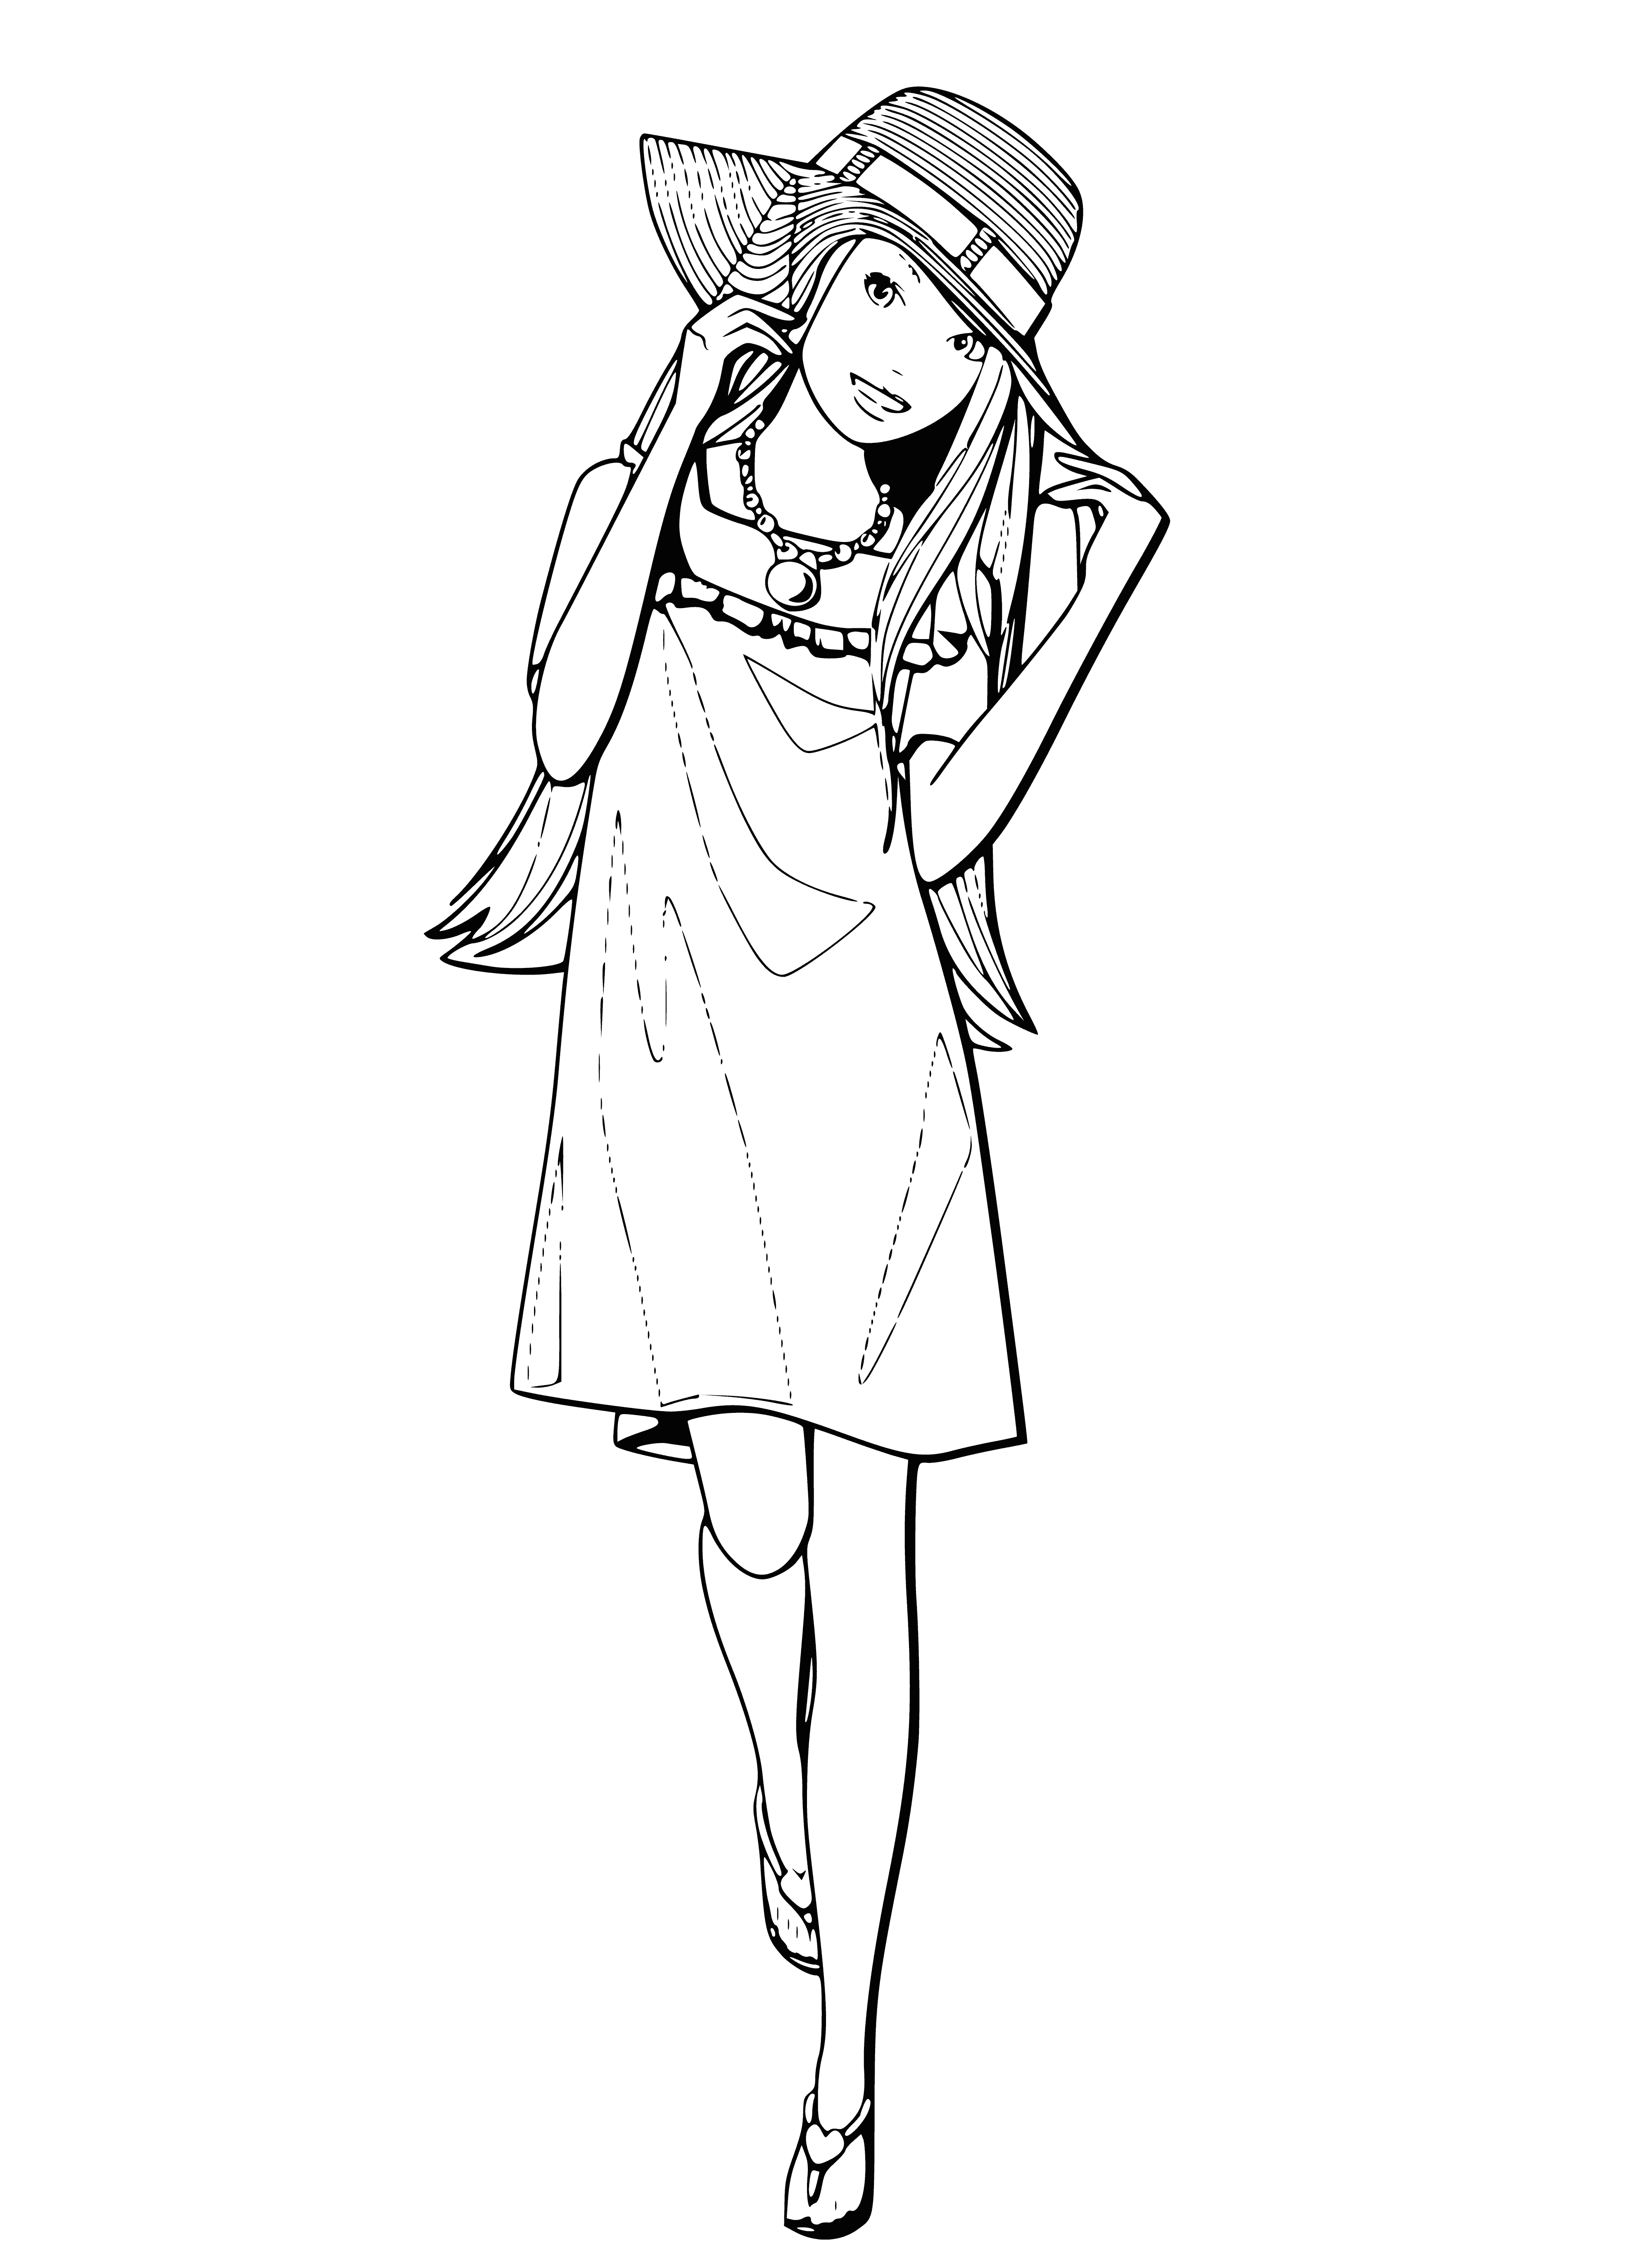 Barbie in a hat coloring page